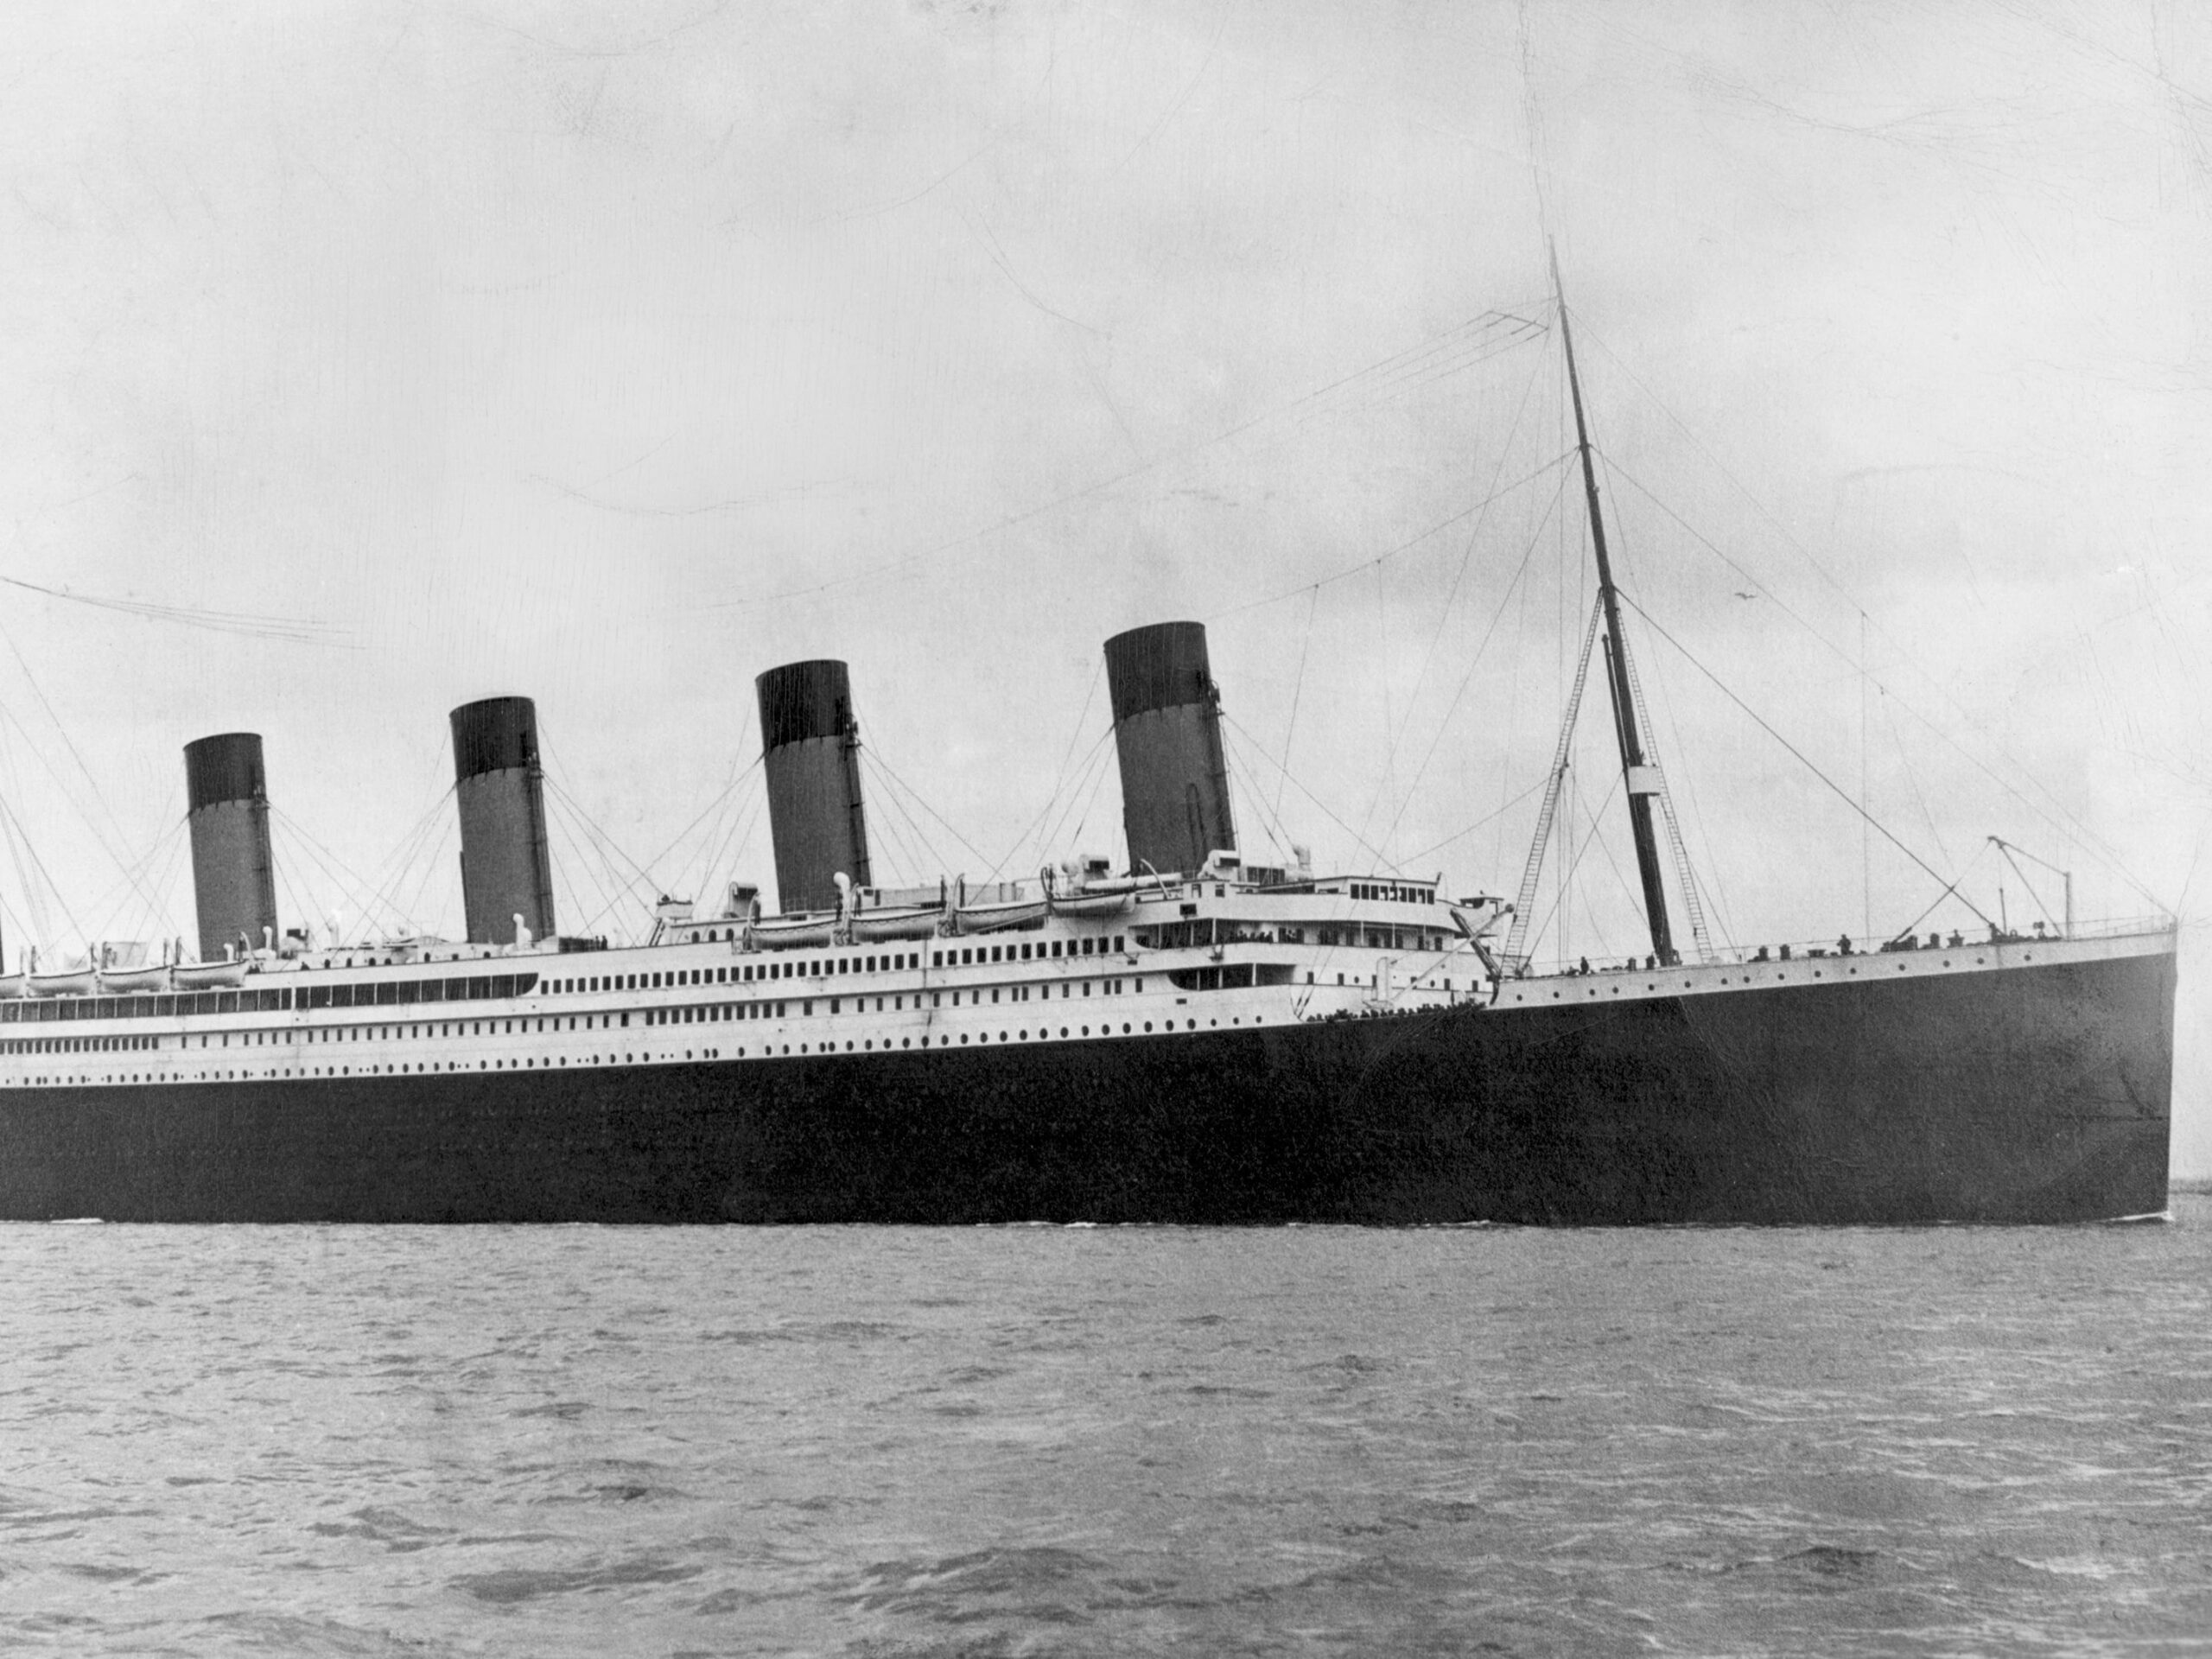 The Titanic, a ship of the Cunard White Star Line, made her maiden voyage from Southampton on April 10, and wrecked off Cape Race, April 15, 1912.